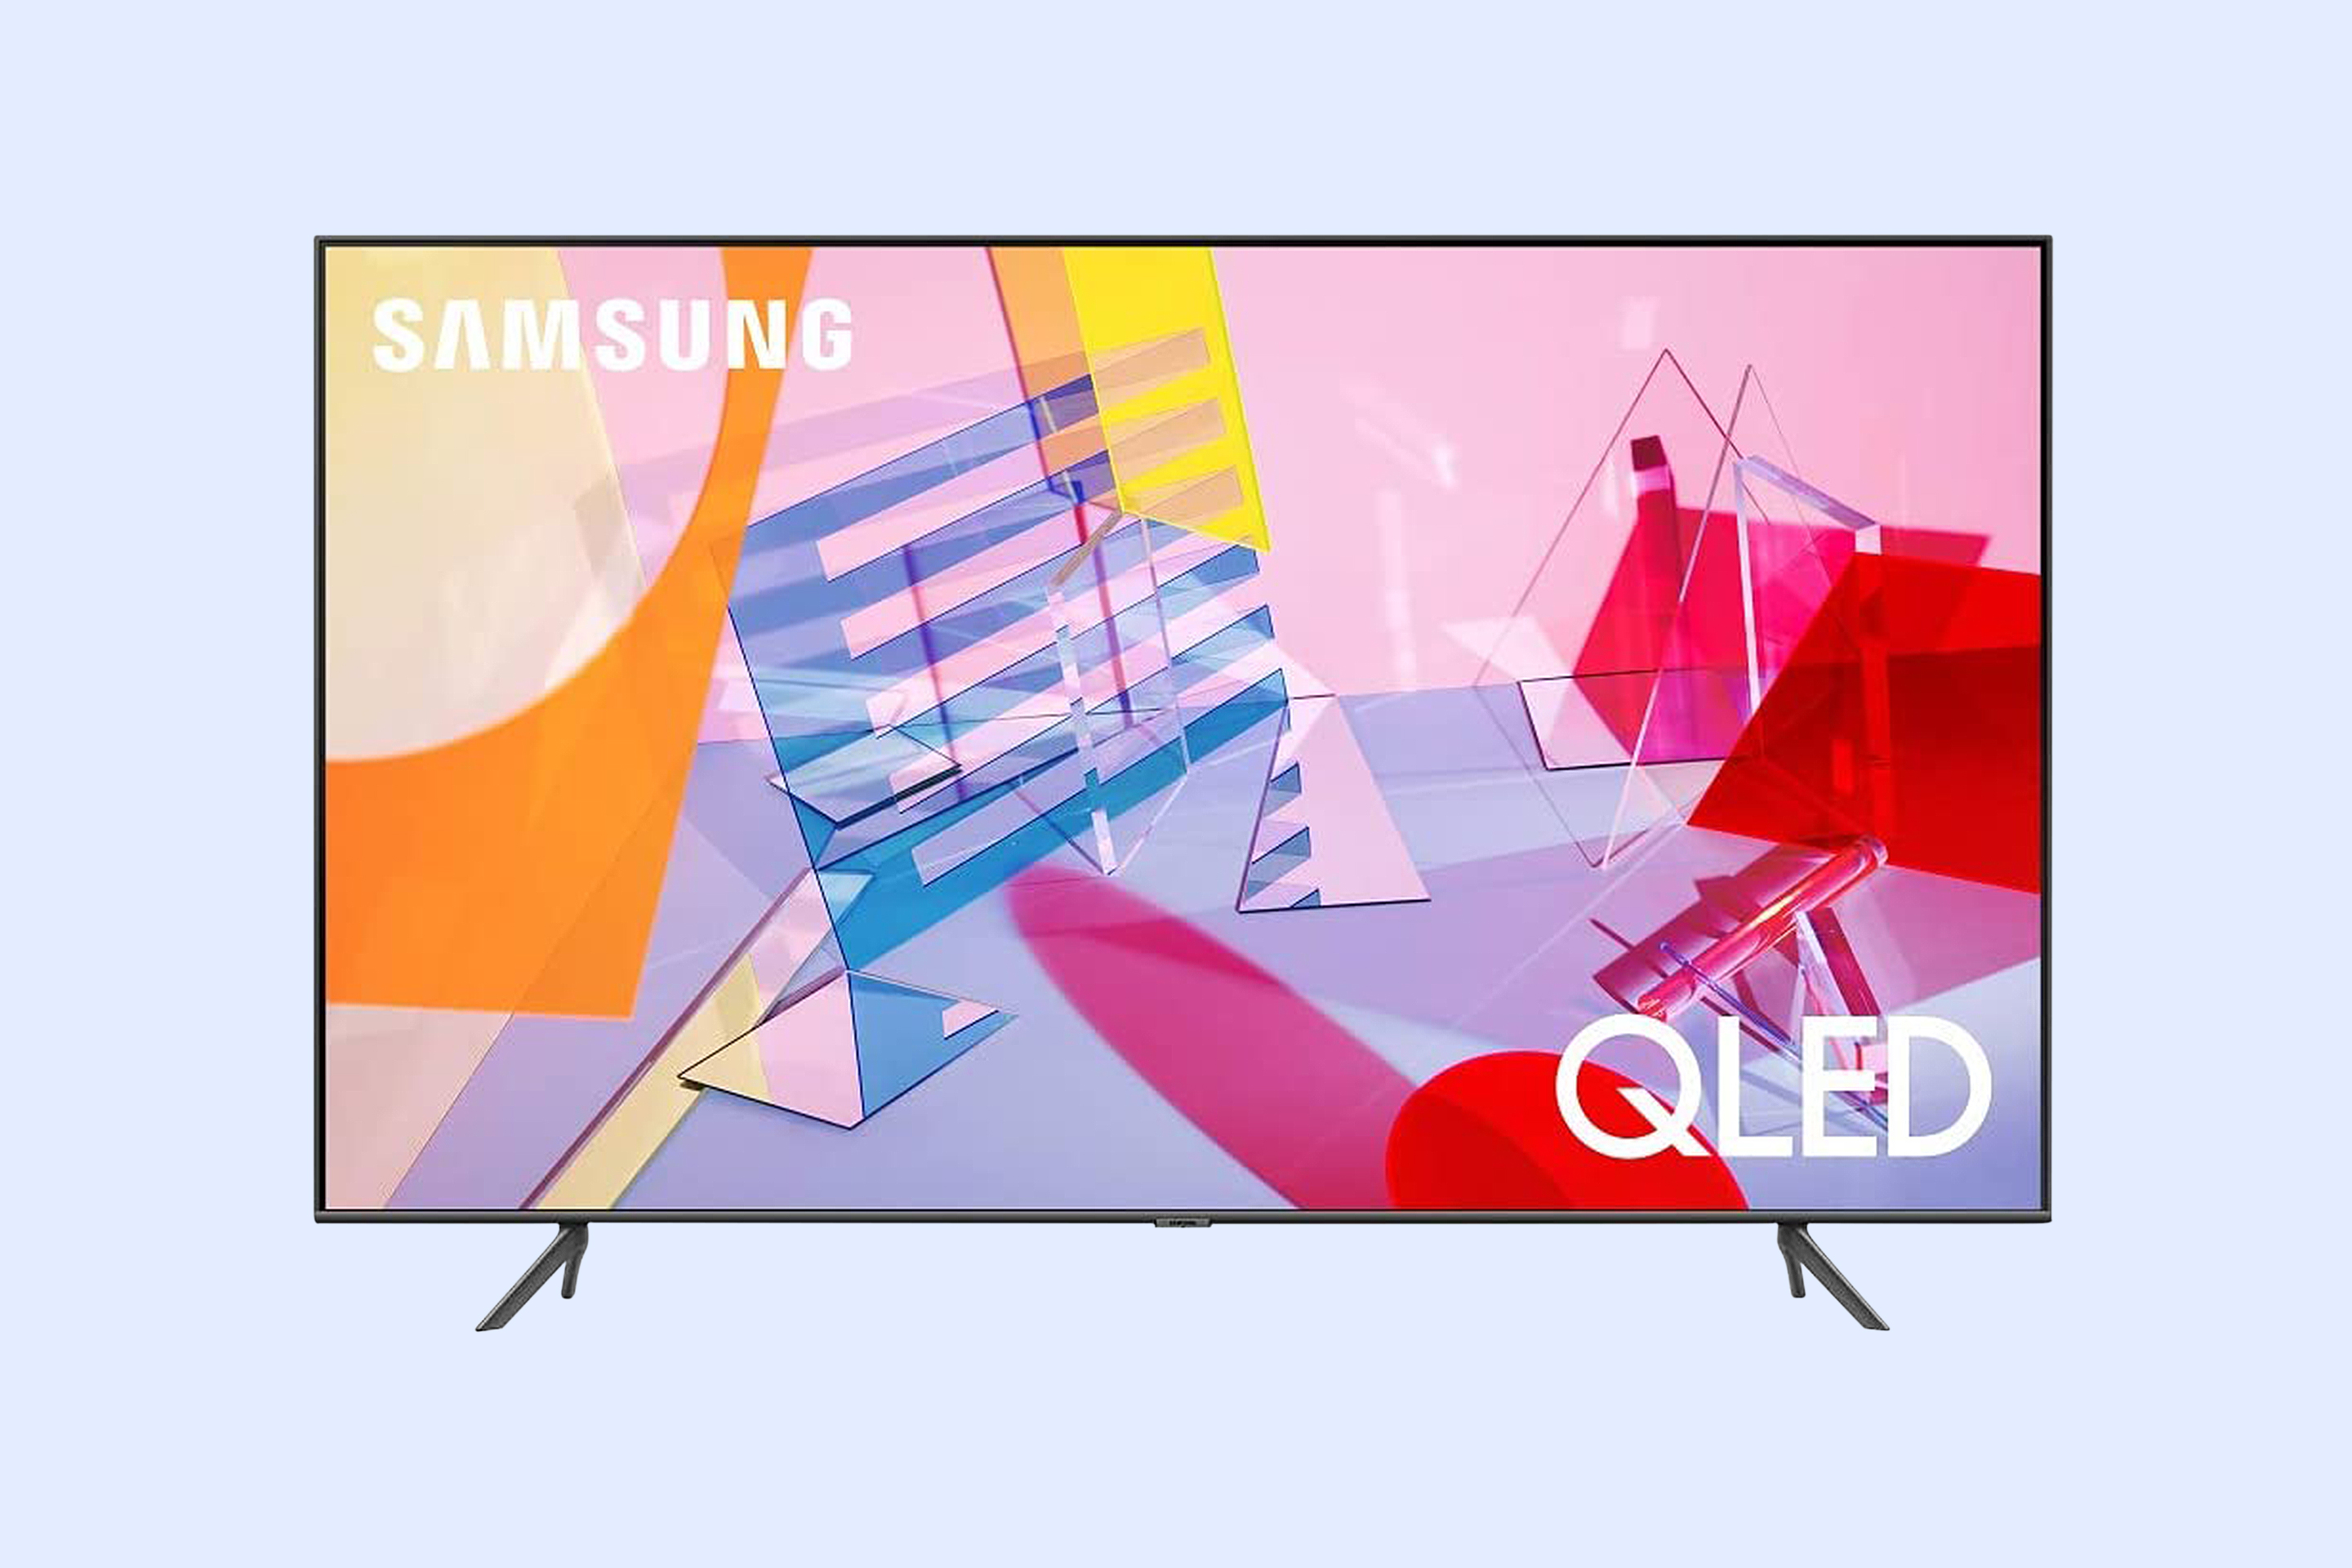 Samsung QLED Smart TV with Abstract Art on Screen